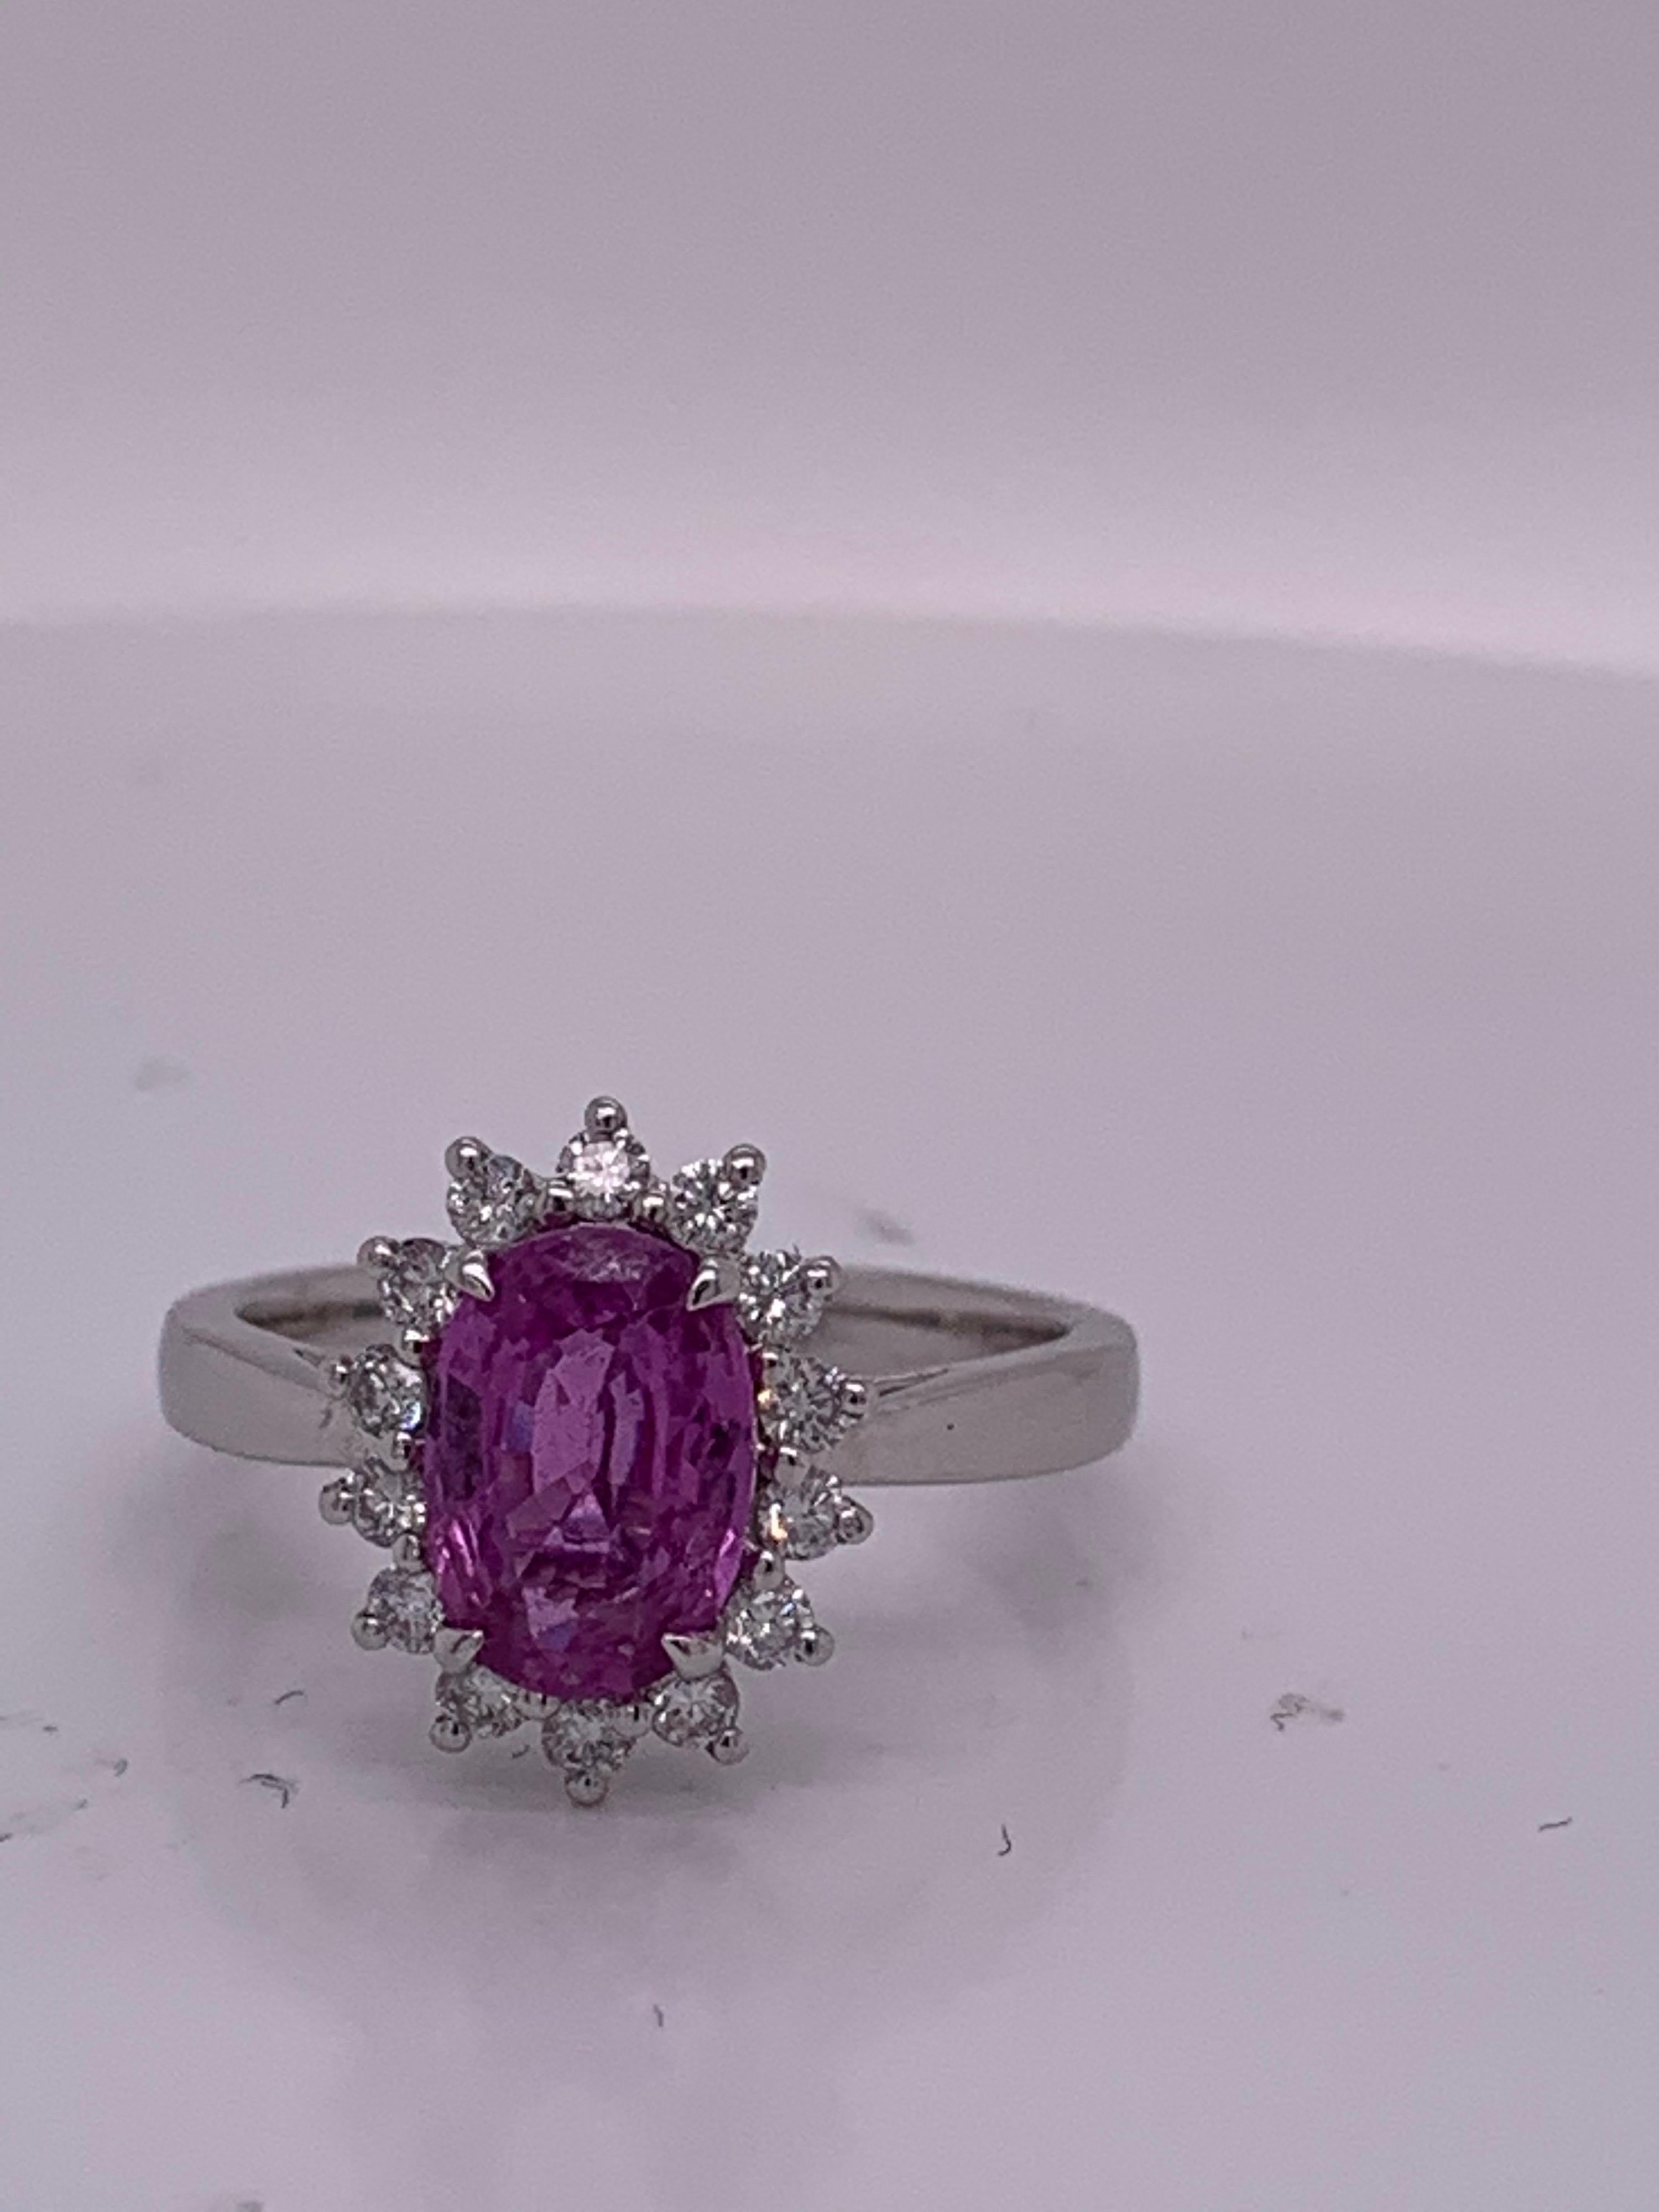 Natural 1.85  Carat Oval Pink sapphire and 0.35 carat Diamond set in Platinum is one of a kind handcrafted Ring. Pink Sapphire is not heated . The Ring is sizable 7

